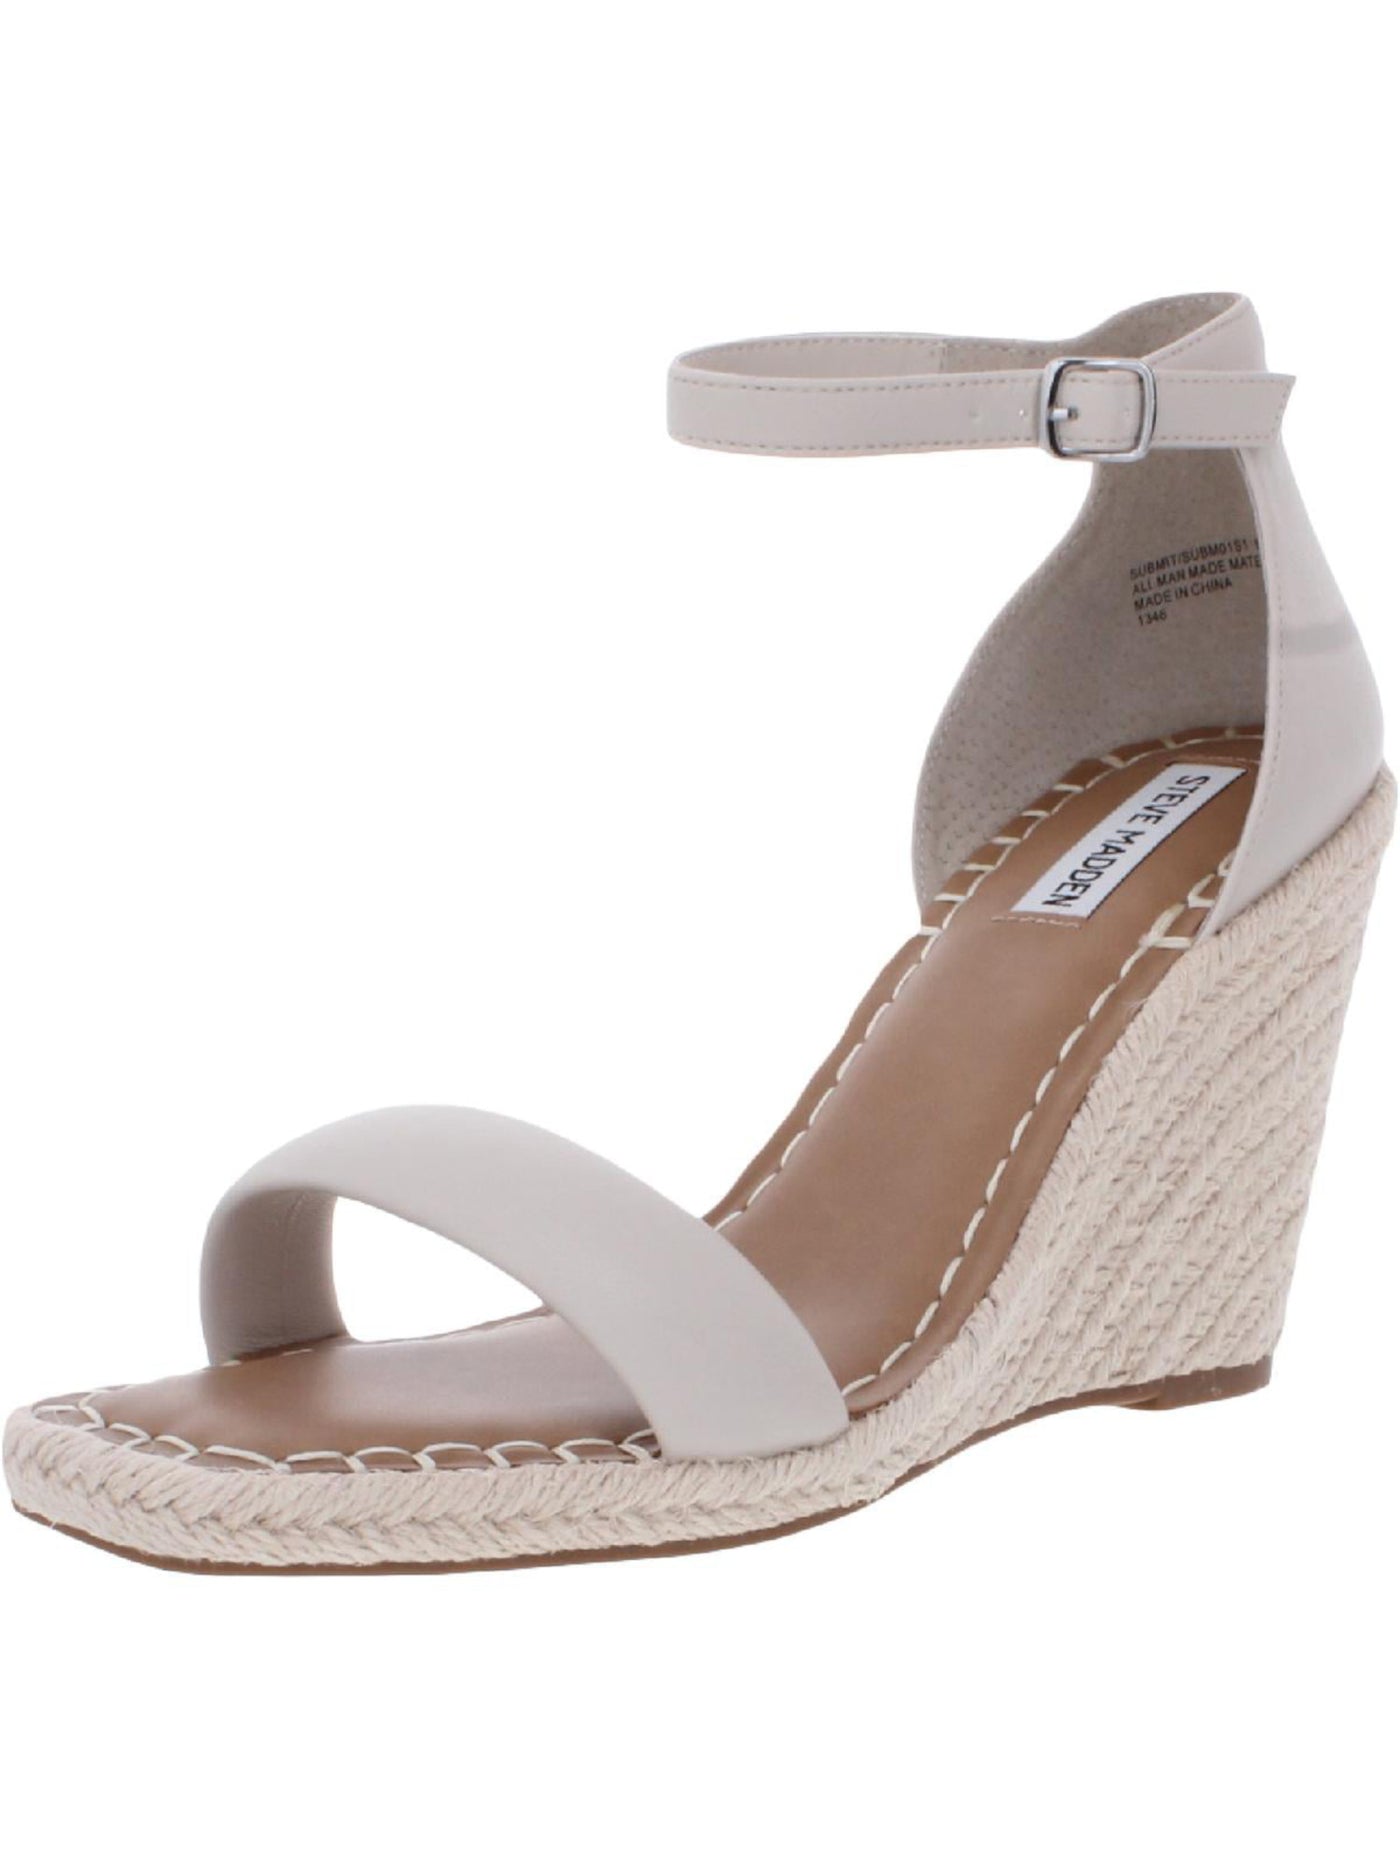 STEVE MADDEN Womens Beige Ankle Strap Comfort Submit Square Toe Wedge Buckle Espadrille Shoes 10 M